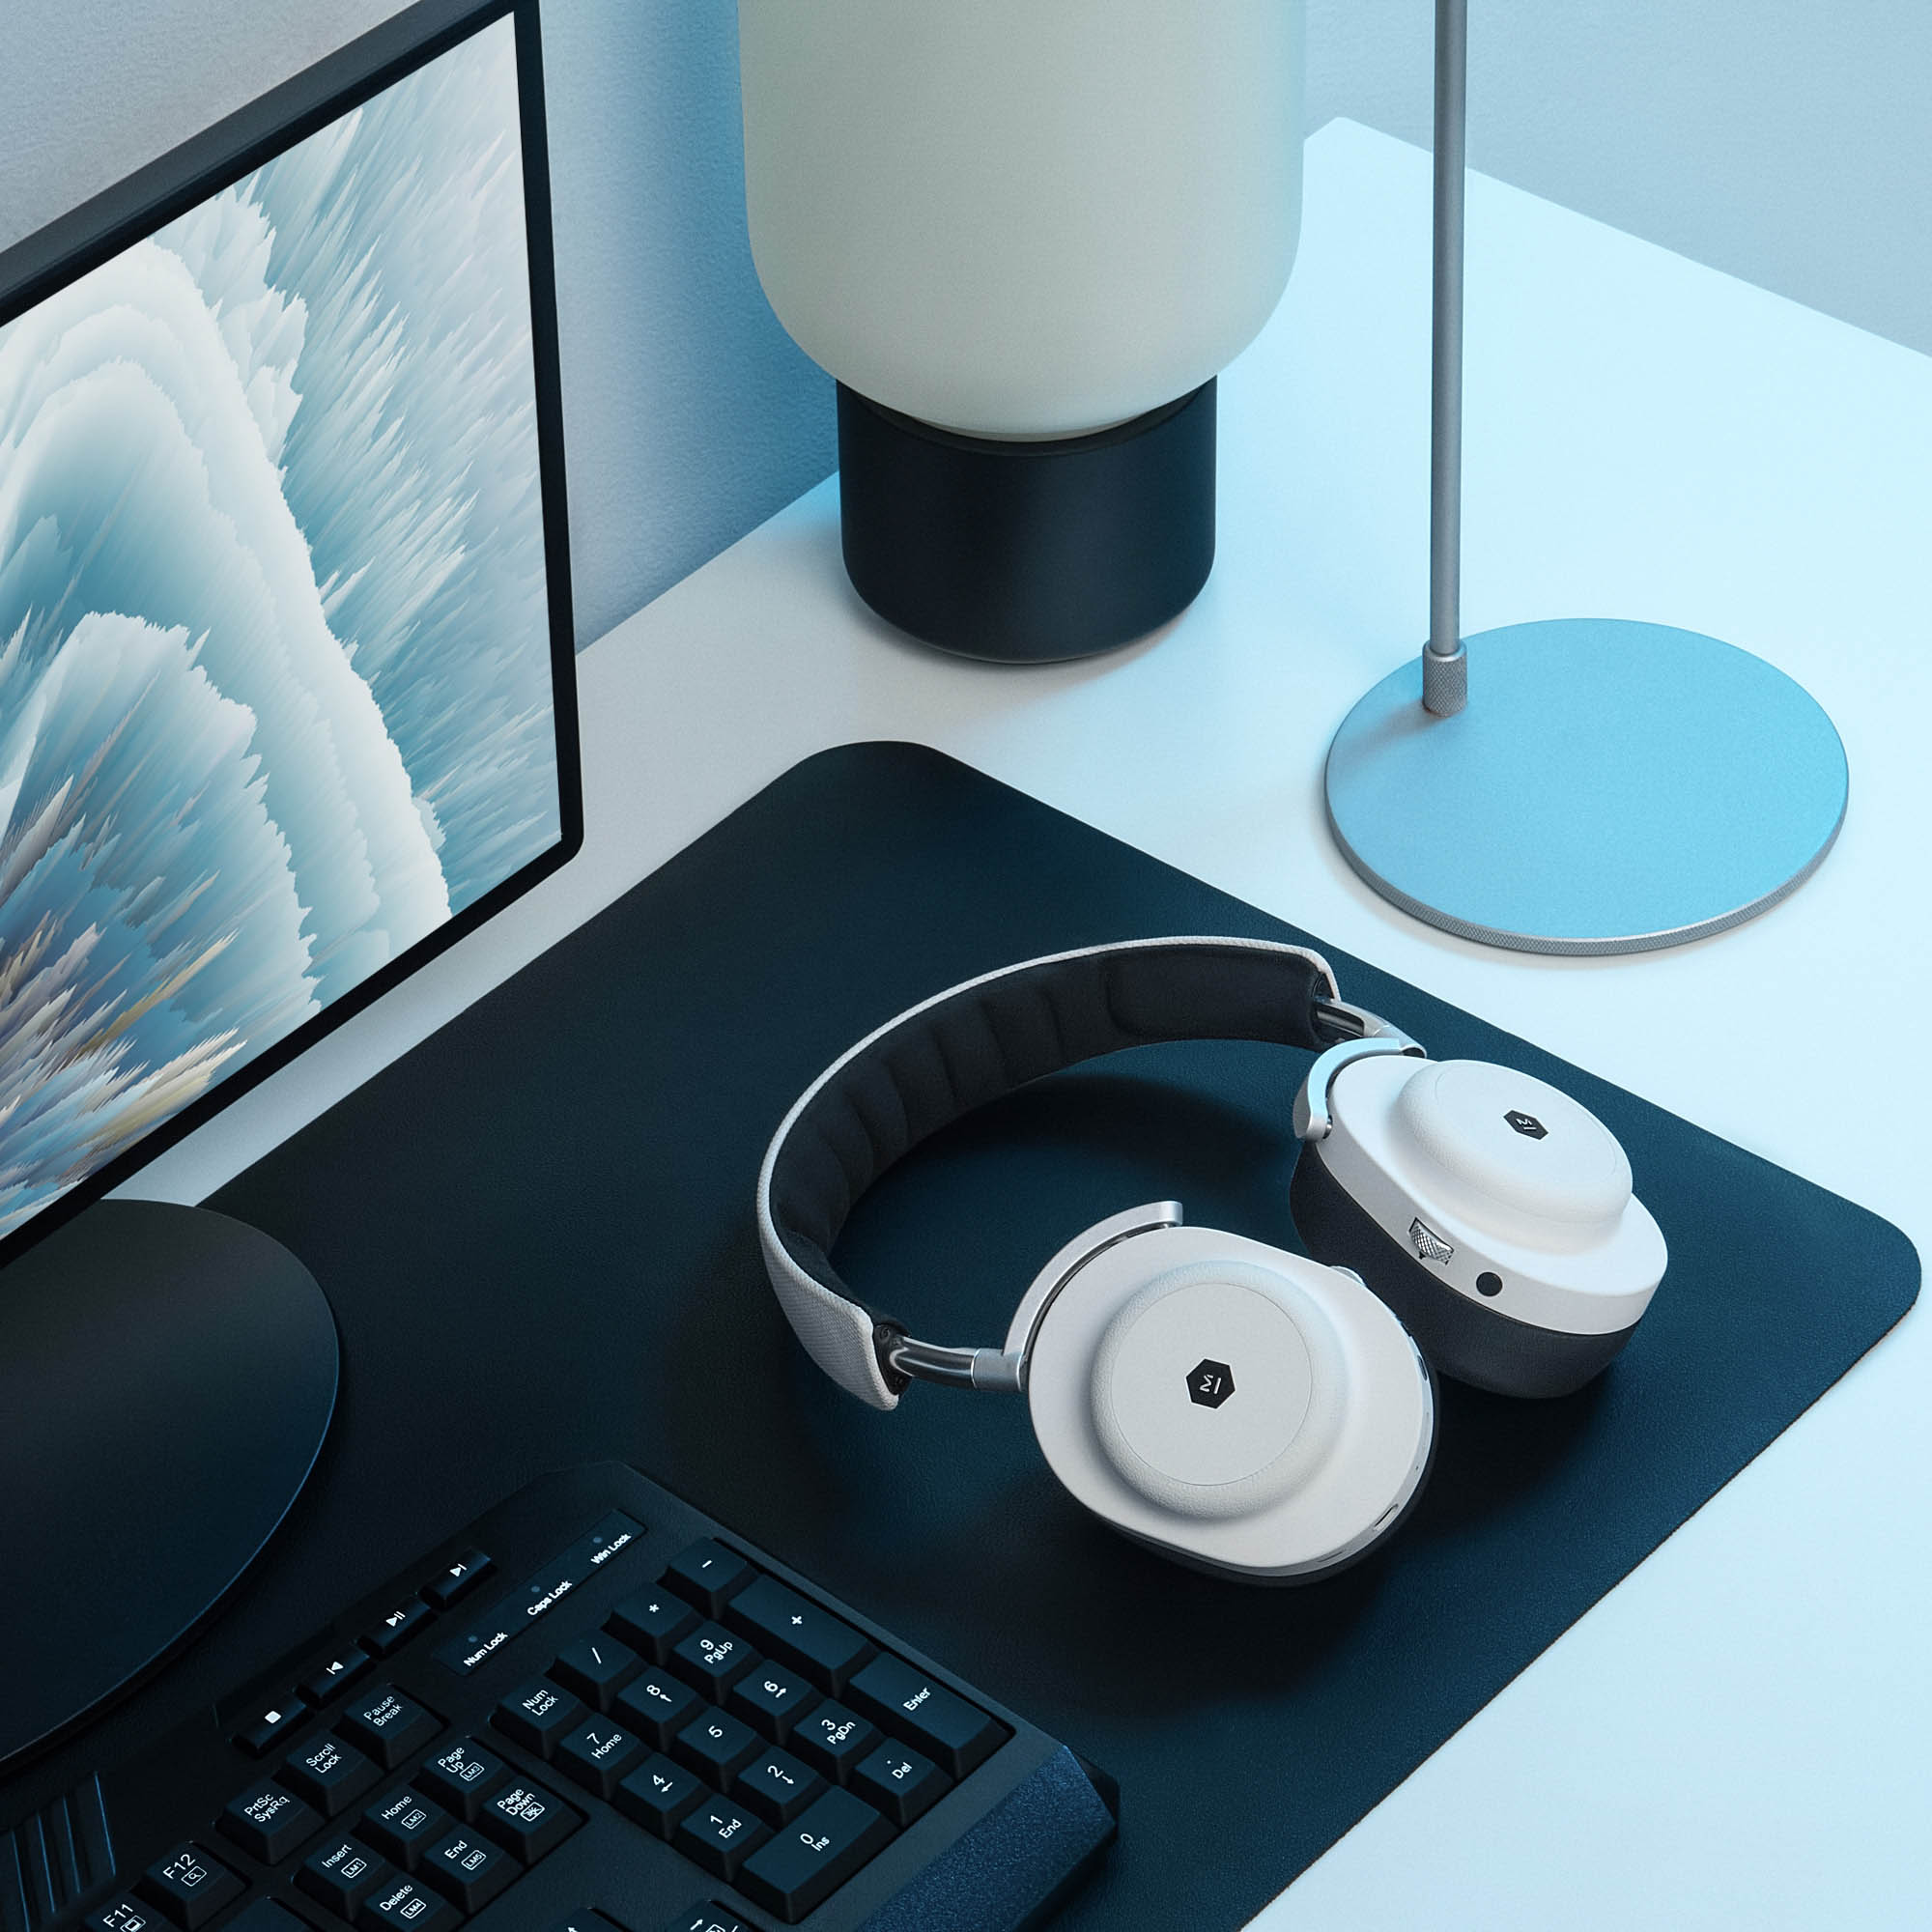 The MG20 Gaming Headphones in Galactic White 